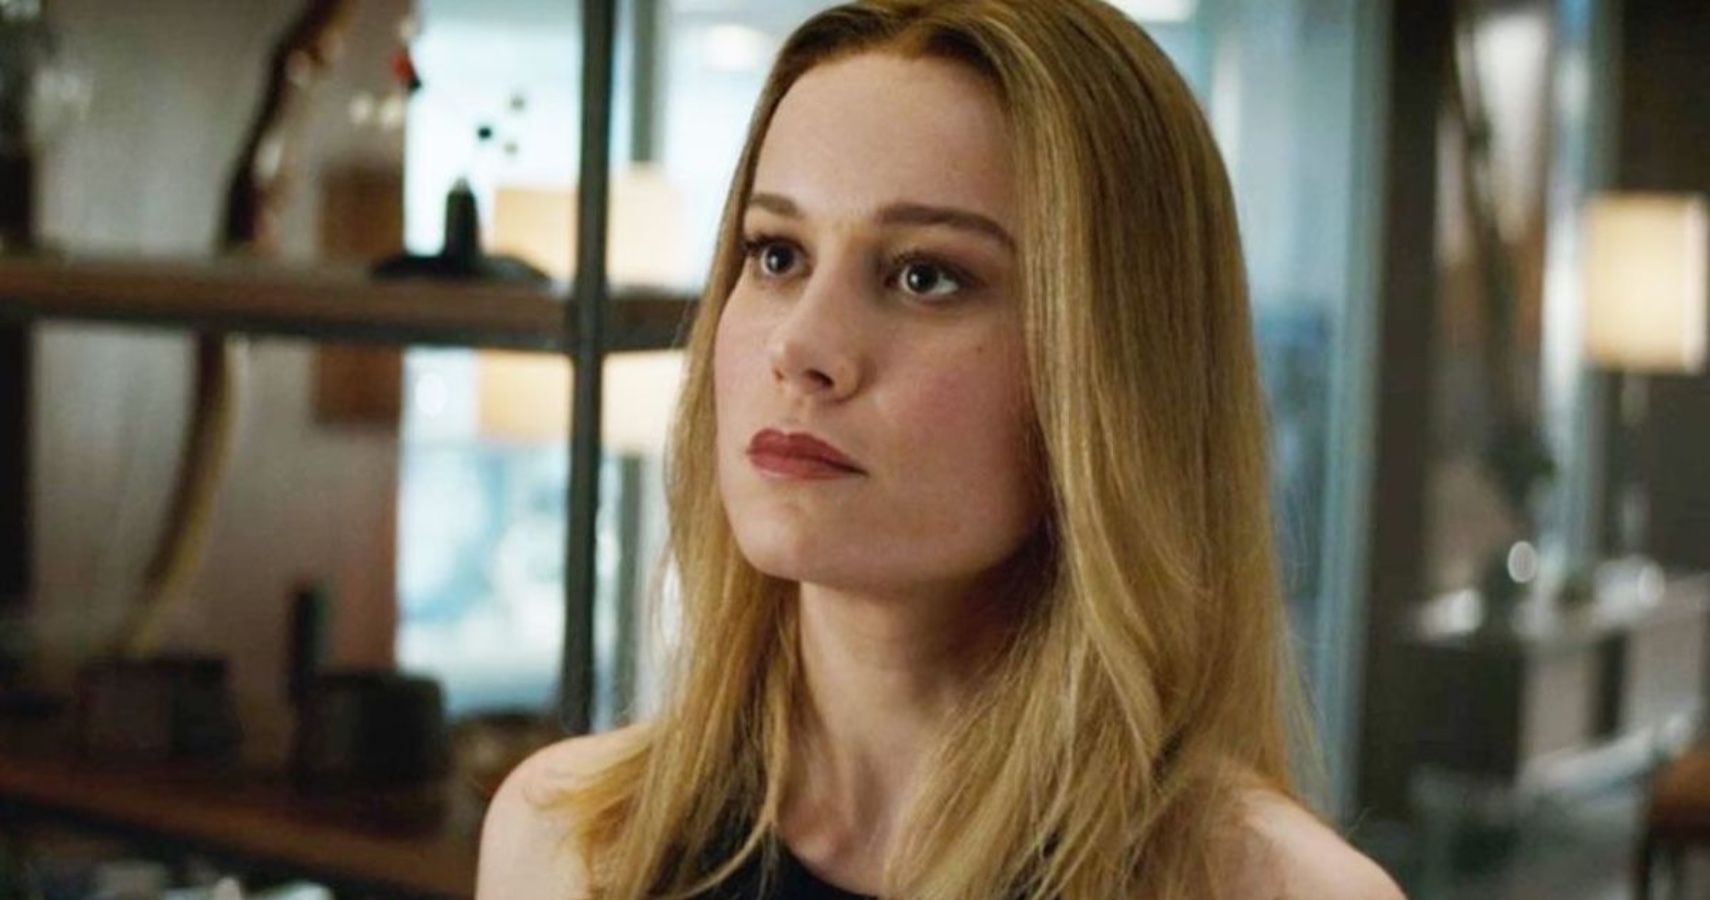 Brie Larson Revealed She Was Told To Dress Sexier When Auditioning For This Role